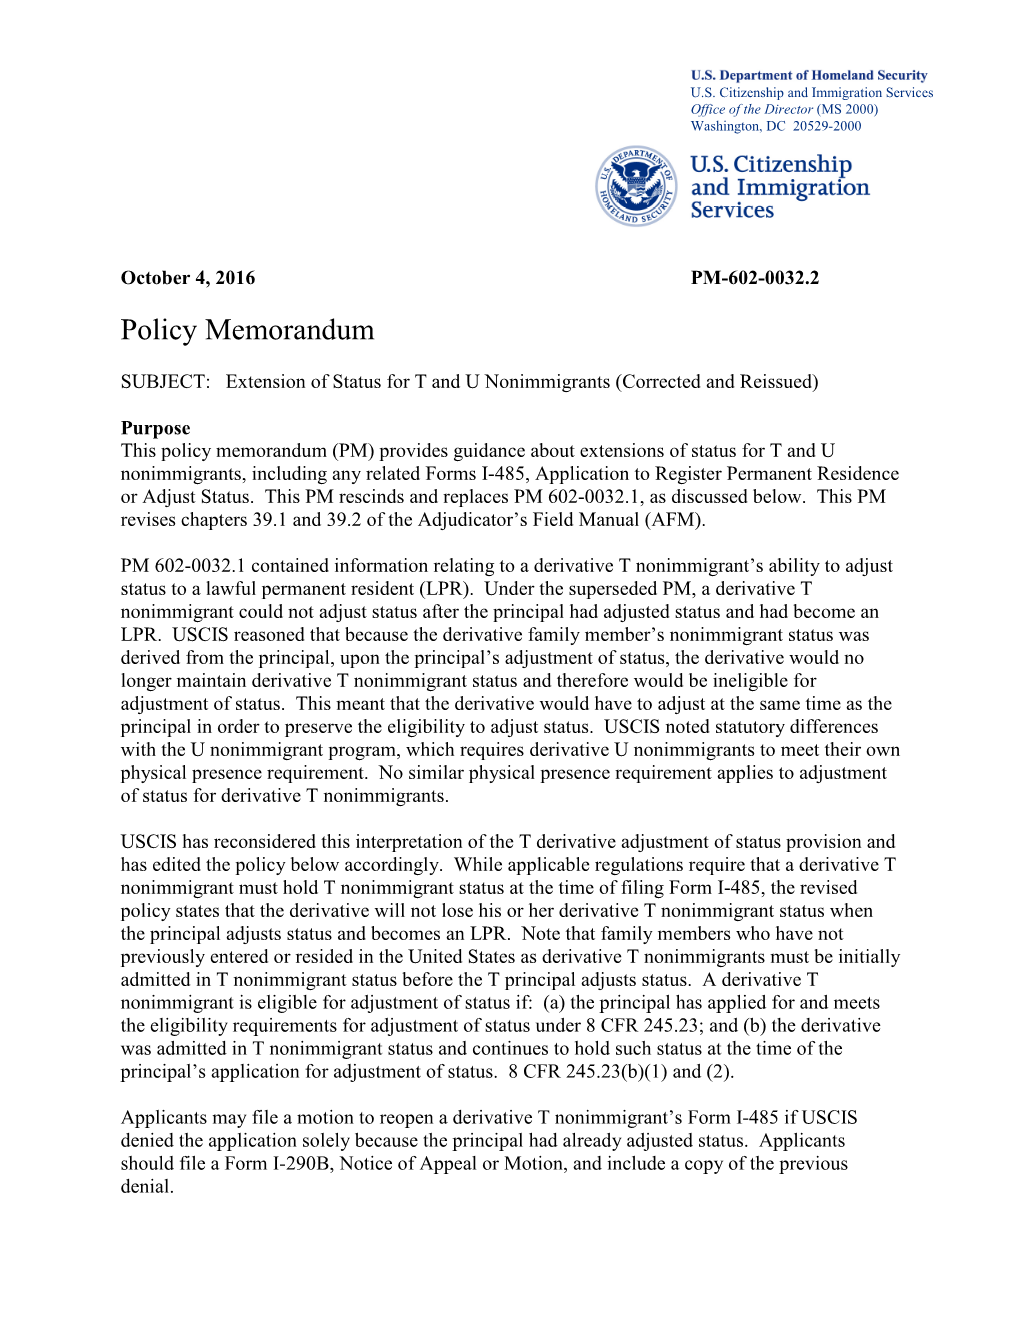 Extension of Status for T and U Nonimmigrants (Corrected and Reissued)